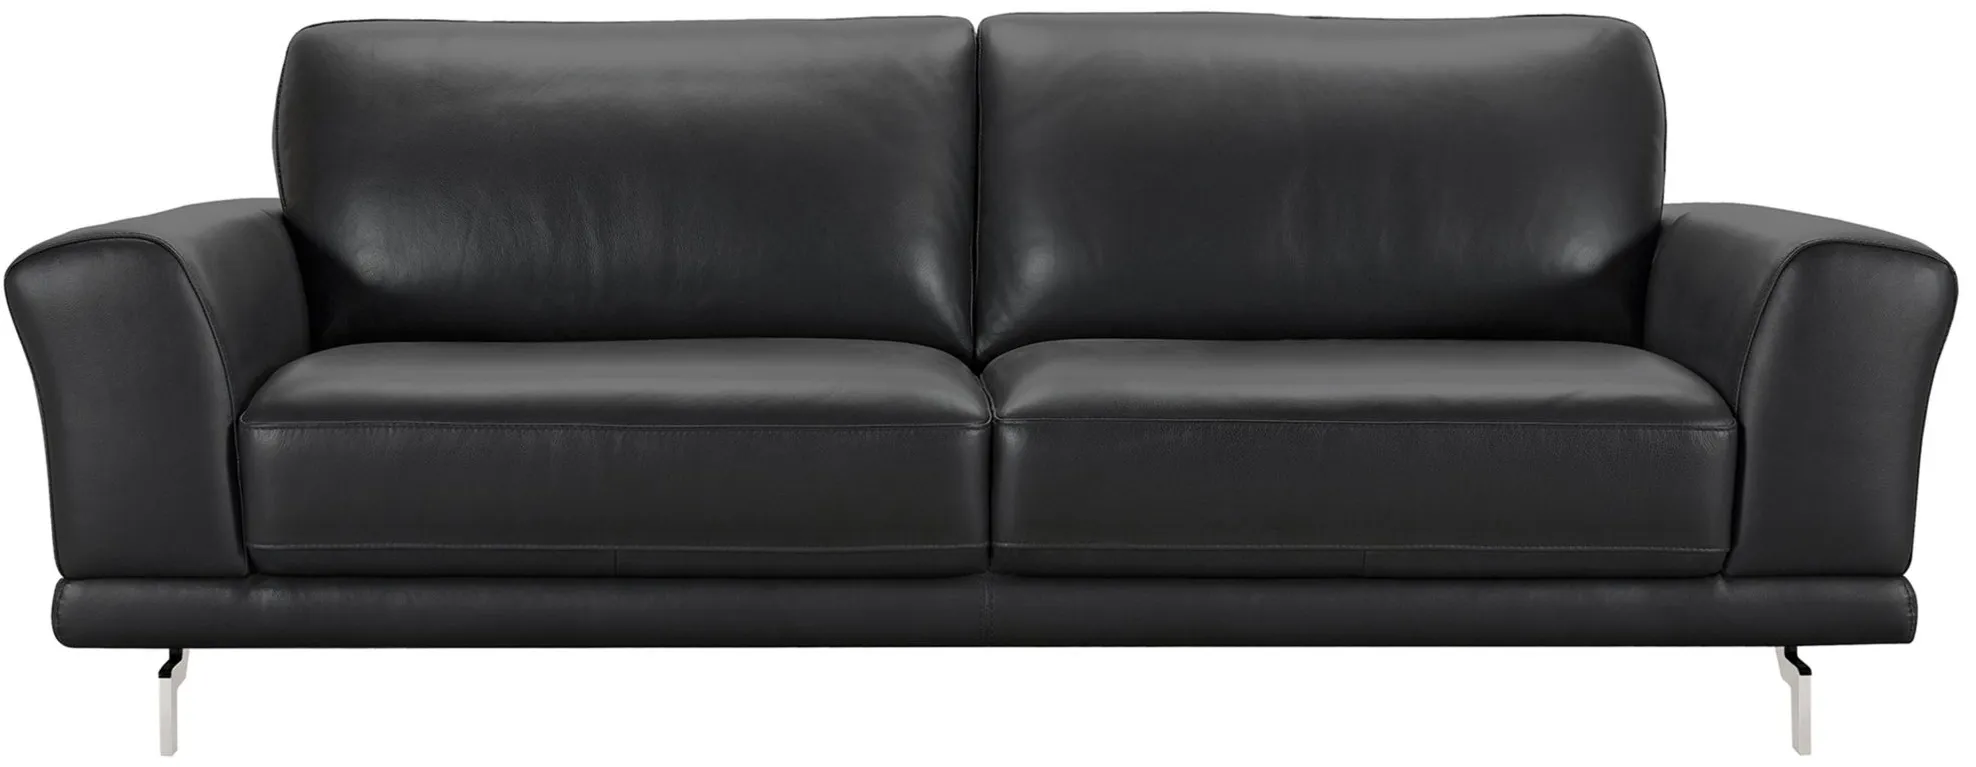 Everly Sofa in Black by Armen Living